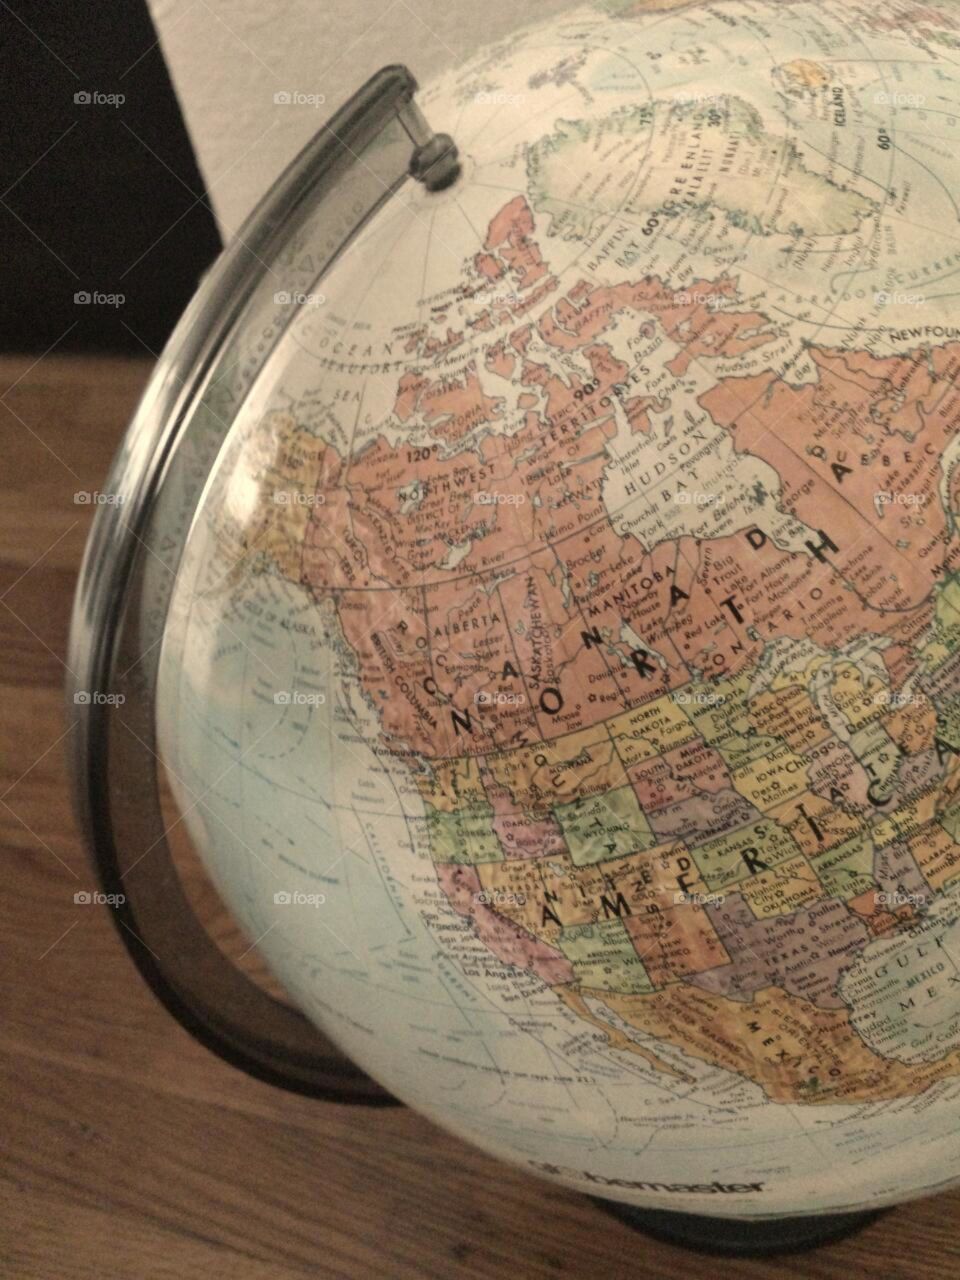 Around the World. Had this globe since I was a lad